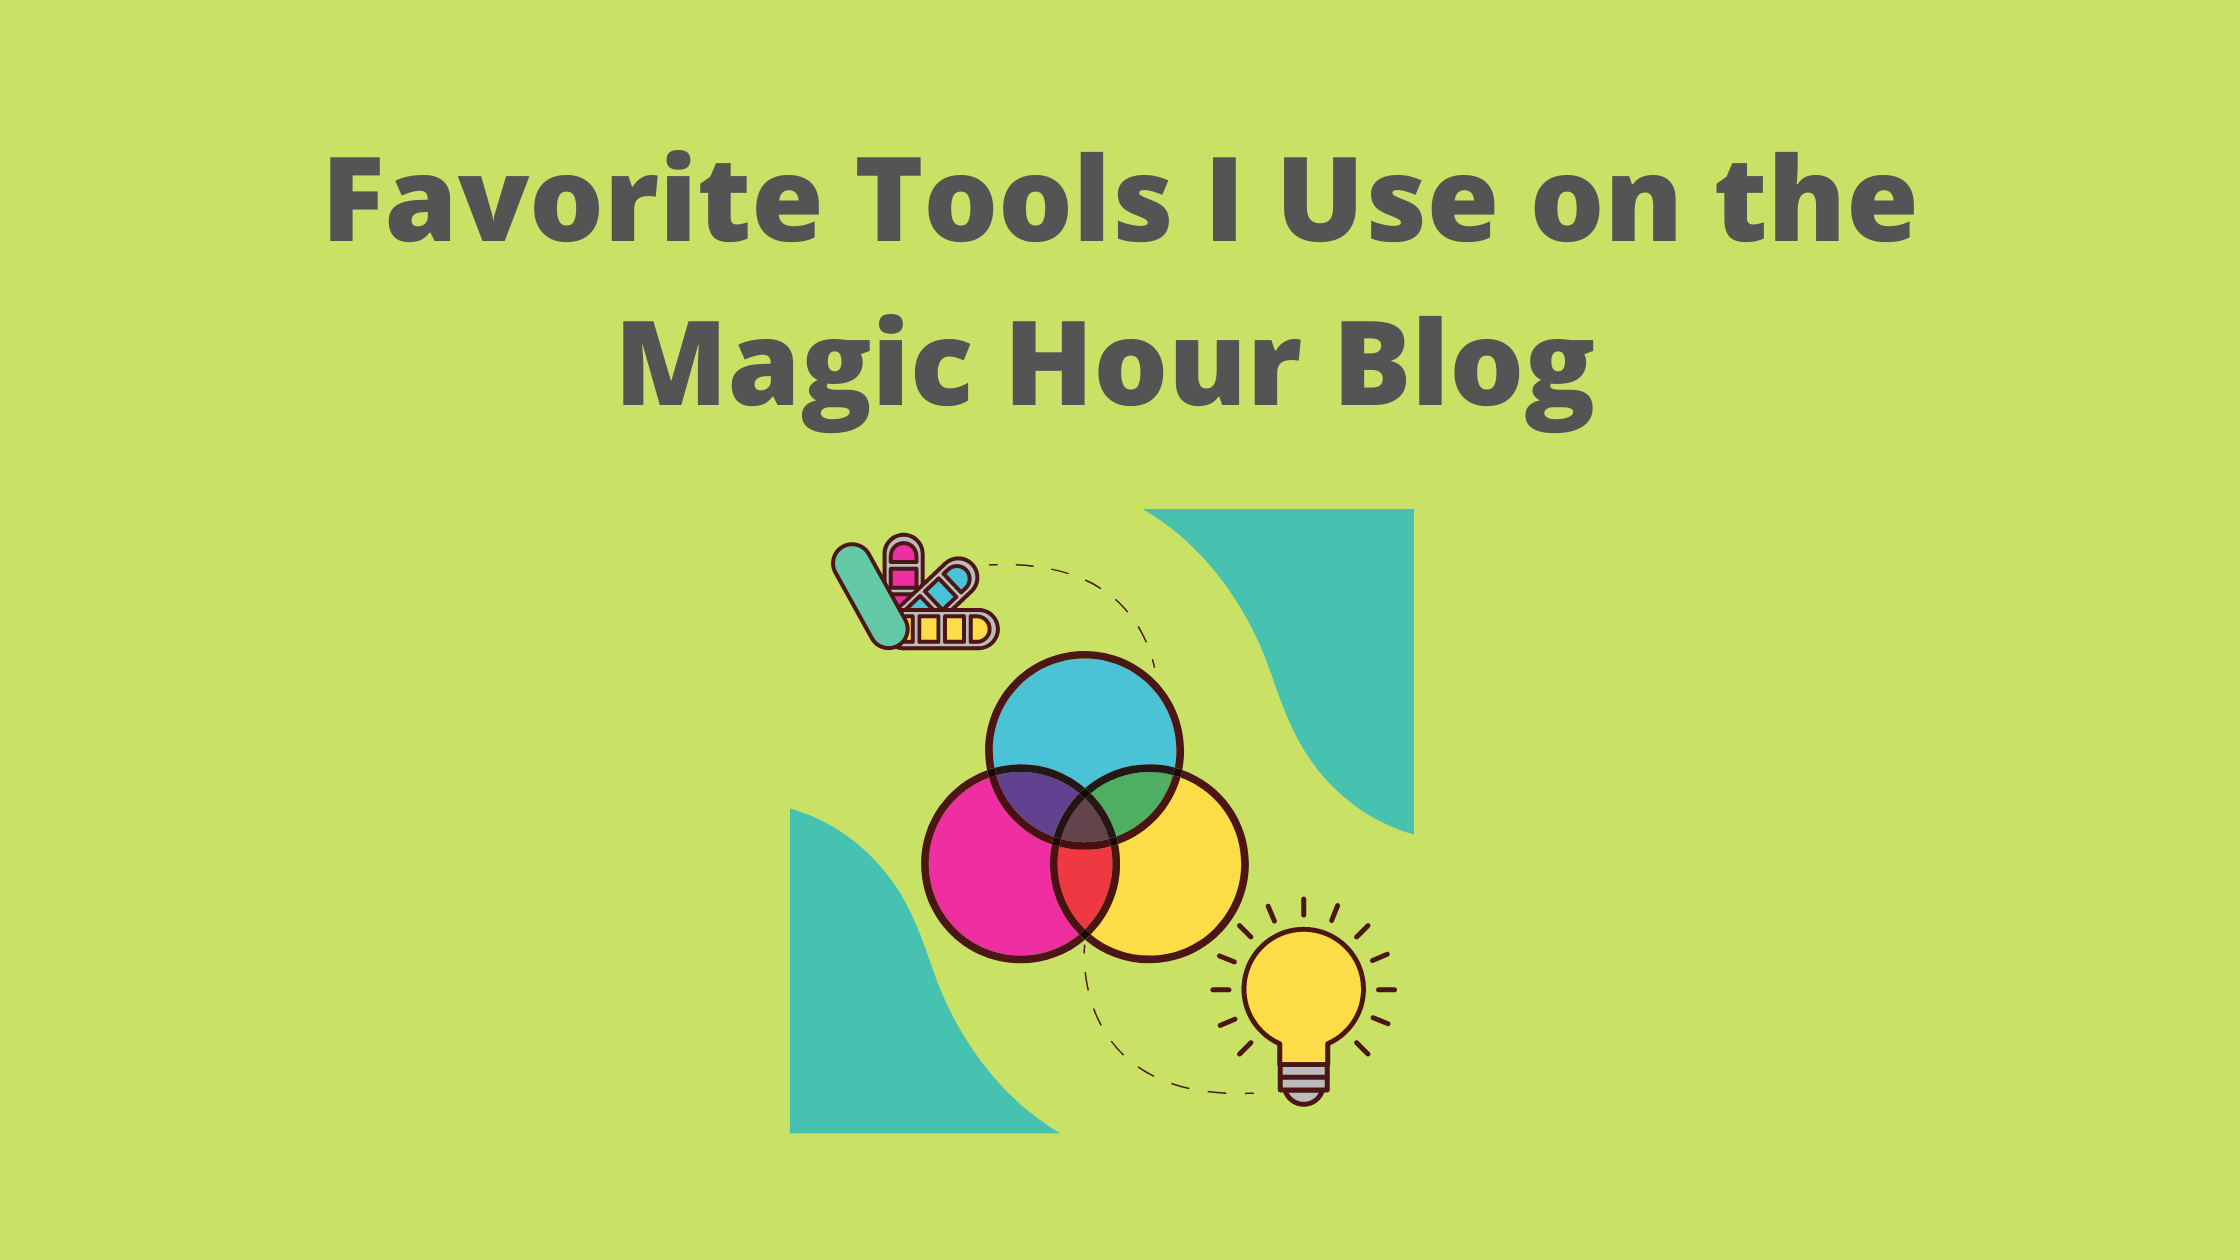 Favorite tools I use on the Magic Hour Blog